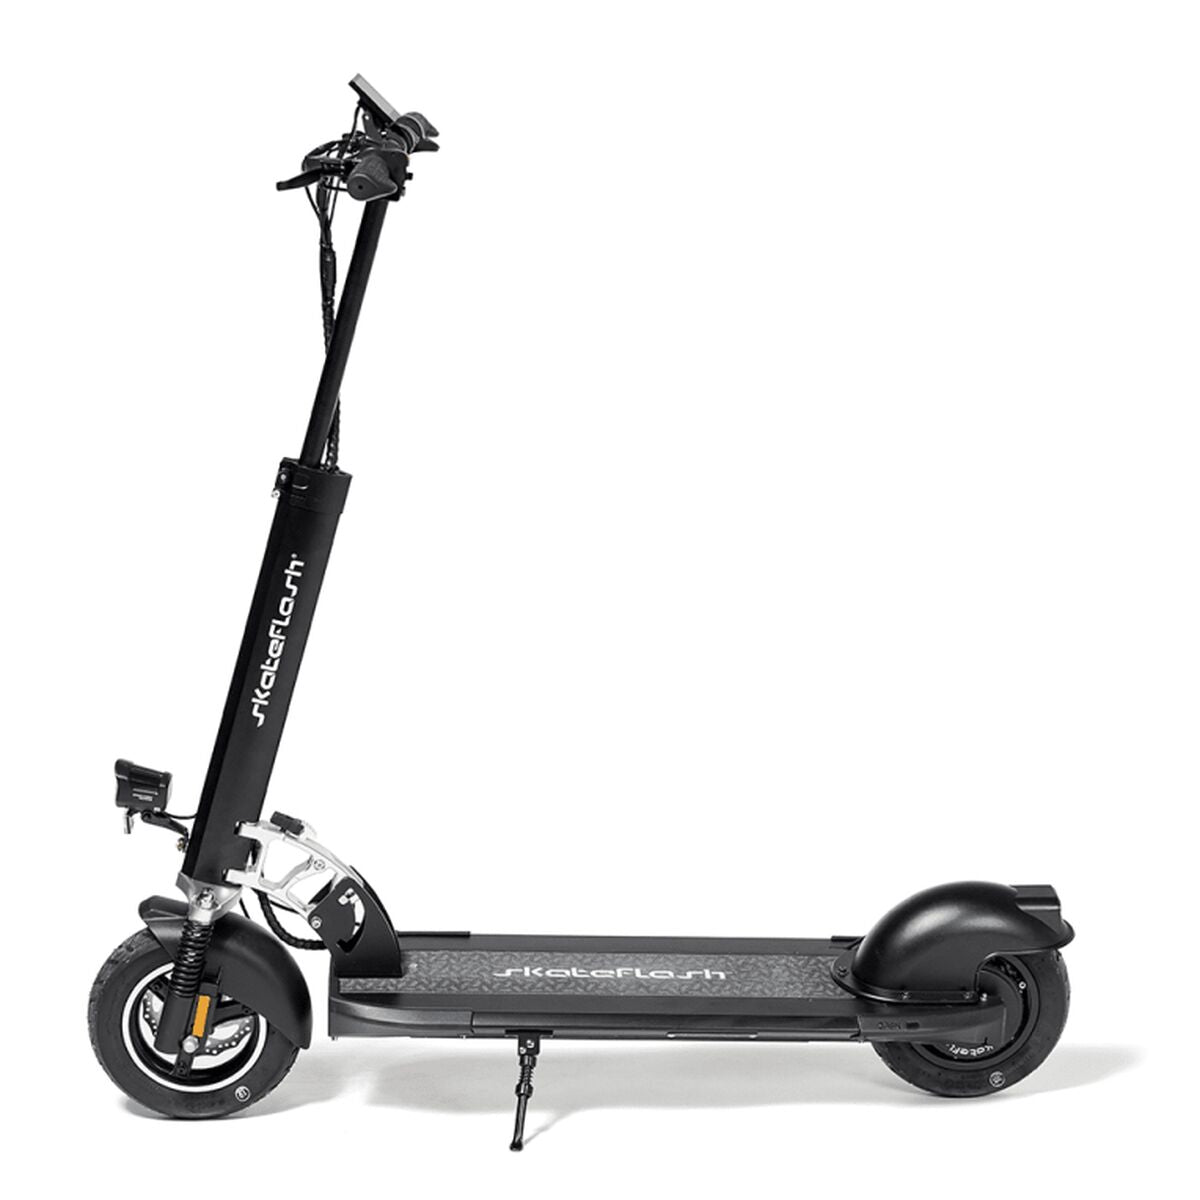 Electric Scooter Skate Flash SK URBAN PRO Black 800 W, Skate Flash, Sports and outdoors, Urban mobility, electric-scooter-skate-flash-sk-urban-pro-black-800-w, Brand_Skate Flash, category-reference-2609, category-reference-2629, category-reference-2904, category-reference-t-19681, category-reference-t-19756, category-reference-t-19876, category-reference-t-21245, category-reference-t-25387, Condition_NEW, deportista / en forma, Price_700 - 800, RiotNook